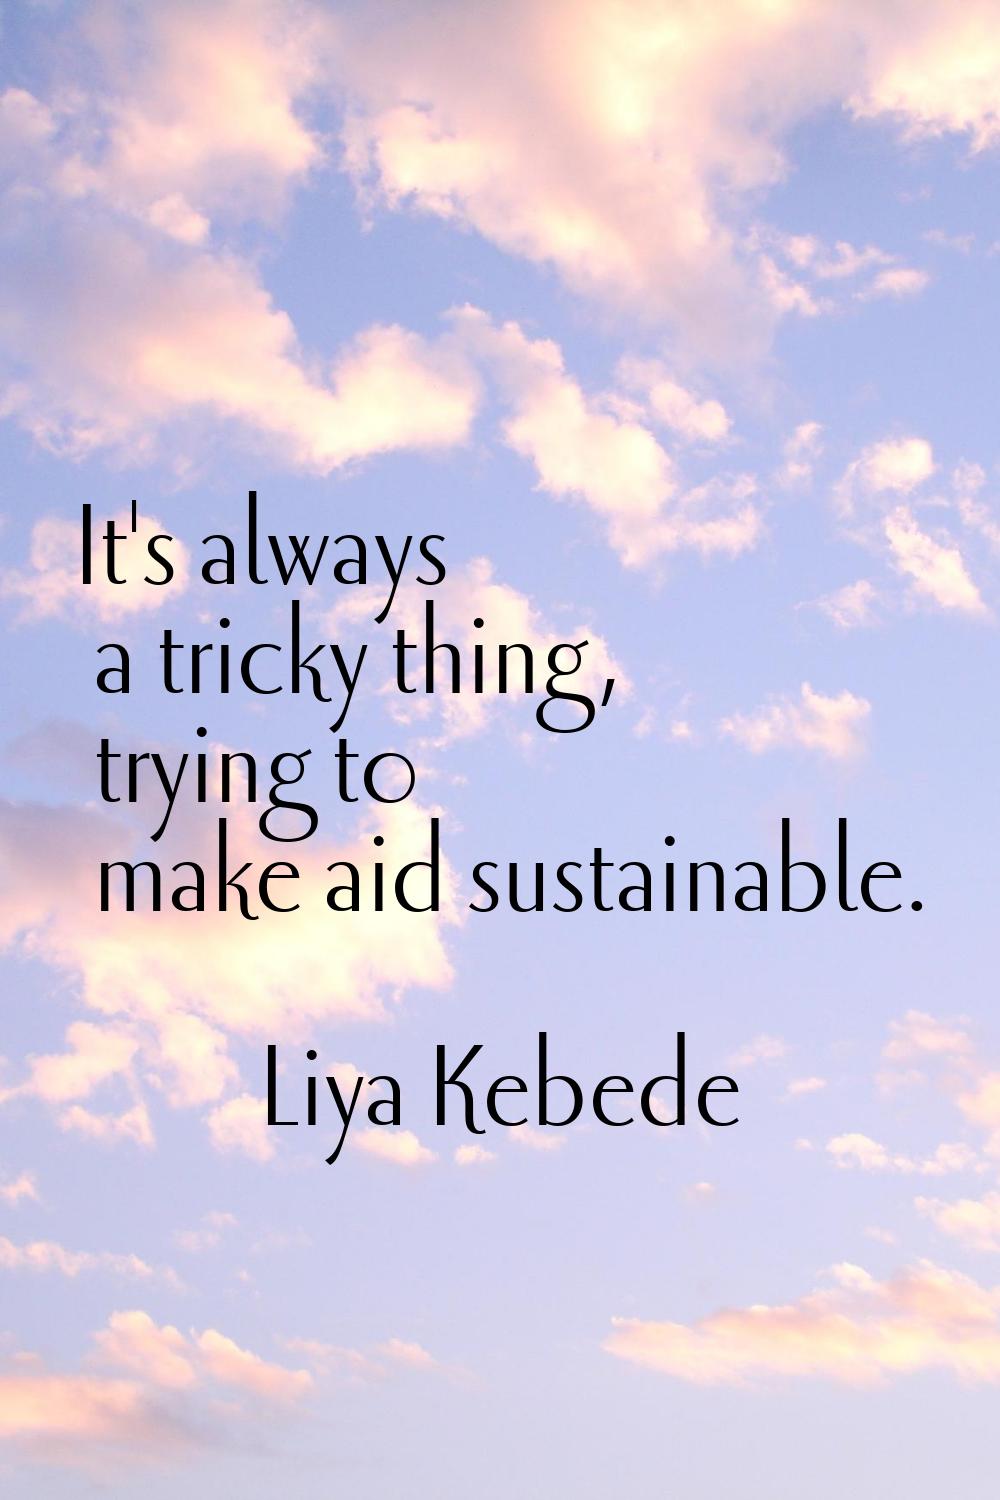 It's always a tricky thing, trying to make aid sustainable.